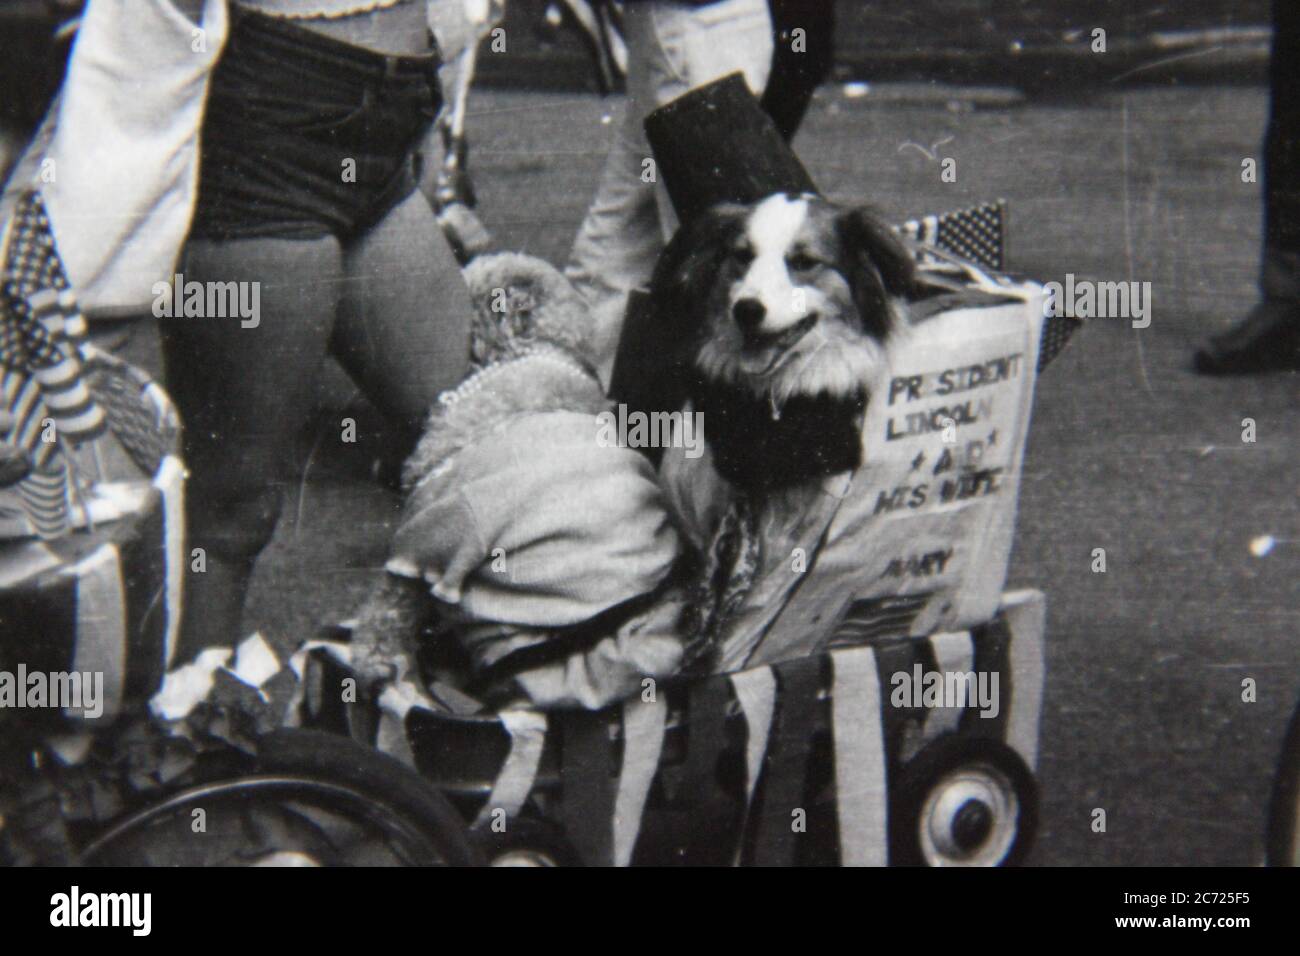 Fine 70s vintage black and white lifestyle photography of a dog dressed up for the Fourth of July parade. Stock Photo